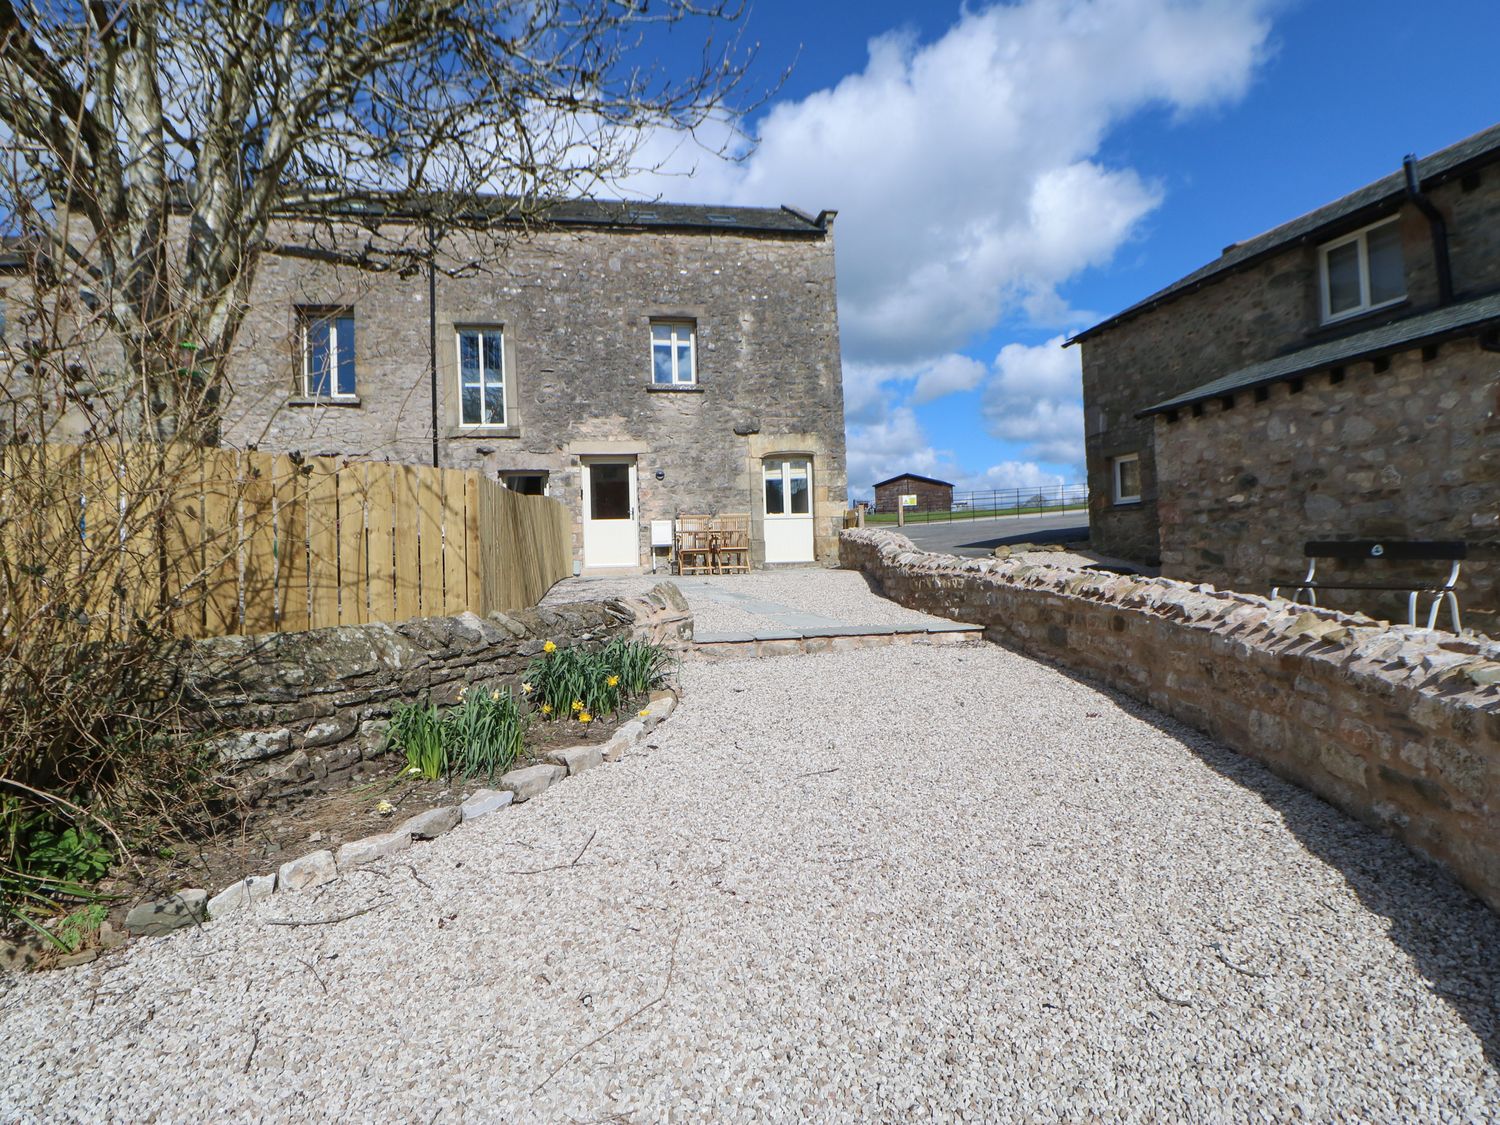 1 Crookenden Row - Yorkshire Dales - 1057802 - photo 1